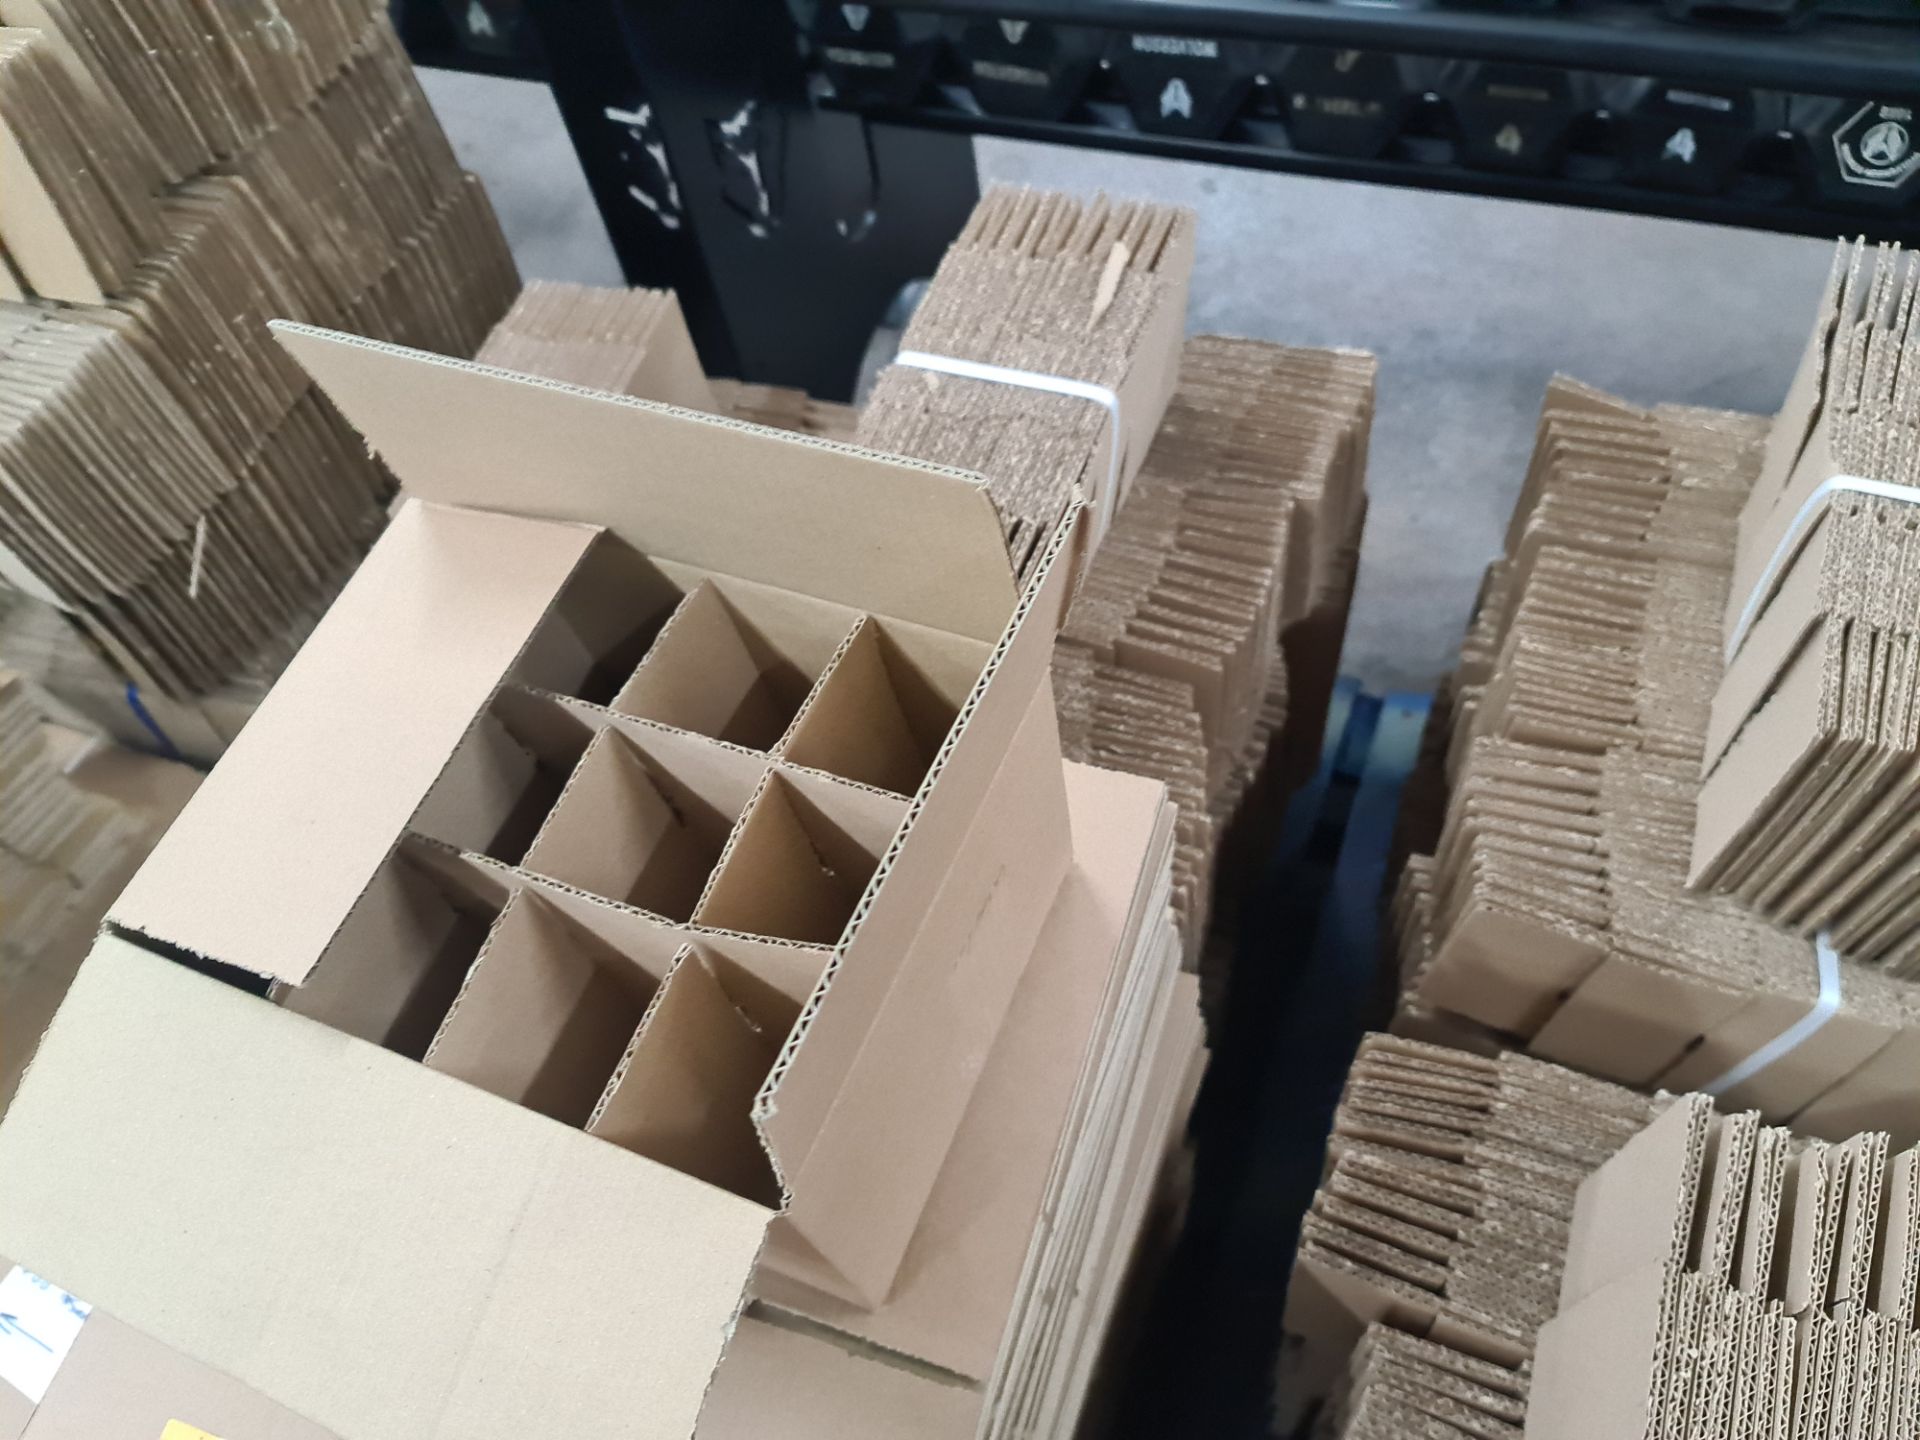 The contents of a pallet of cardboard boxes comprising approximately 300 boxes and 300 inserts in to - Image 8 of 8